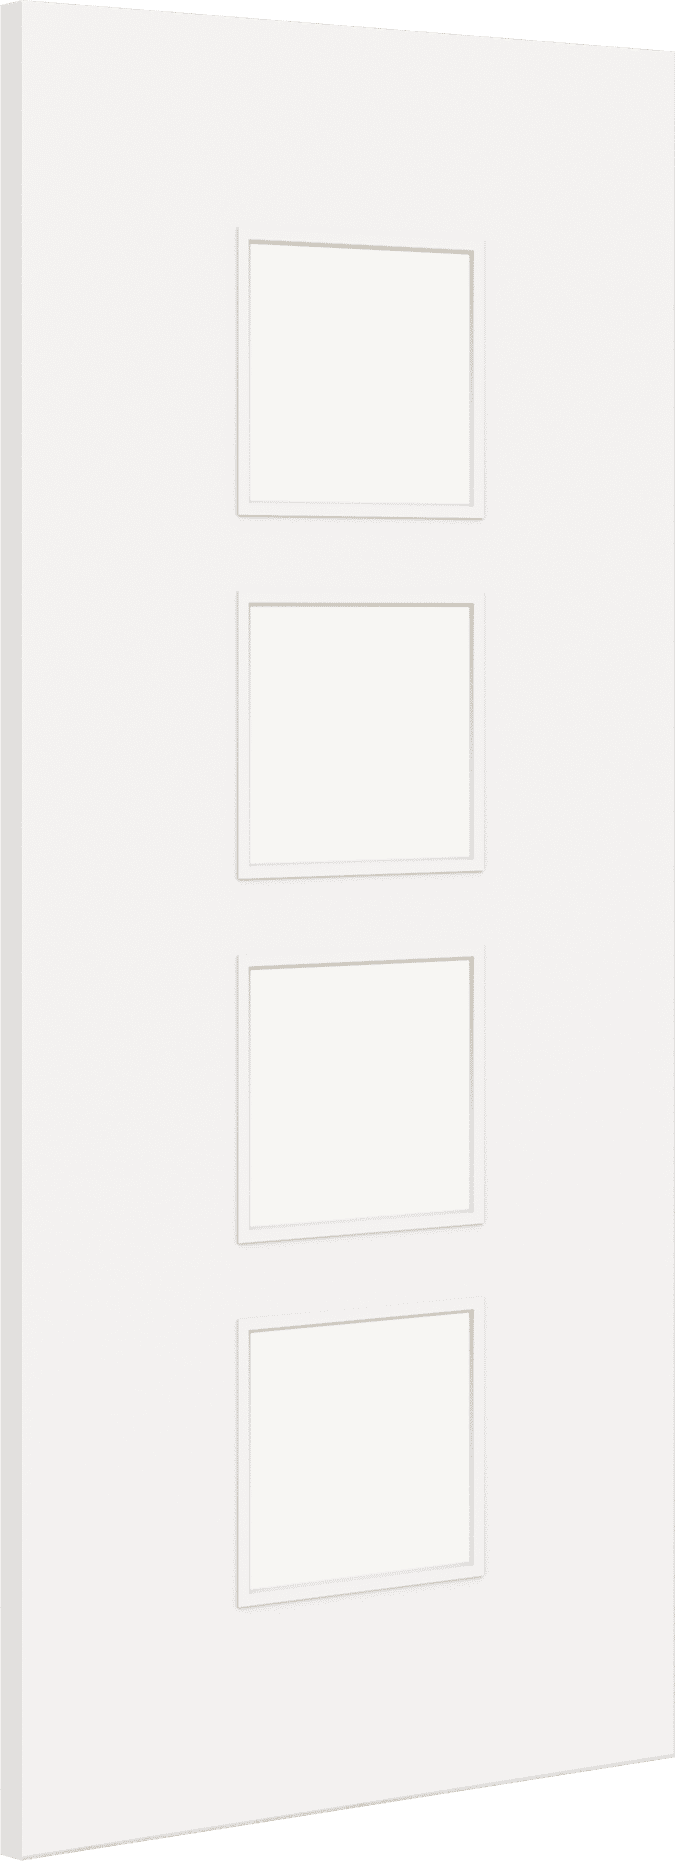 1981mm x 533mm x 44mm (21") Architectural Paint Grade White 09 Clear Glazed Fire Door Blank